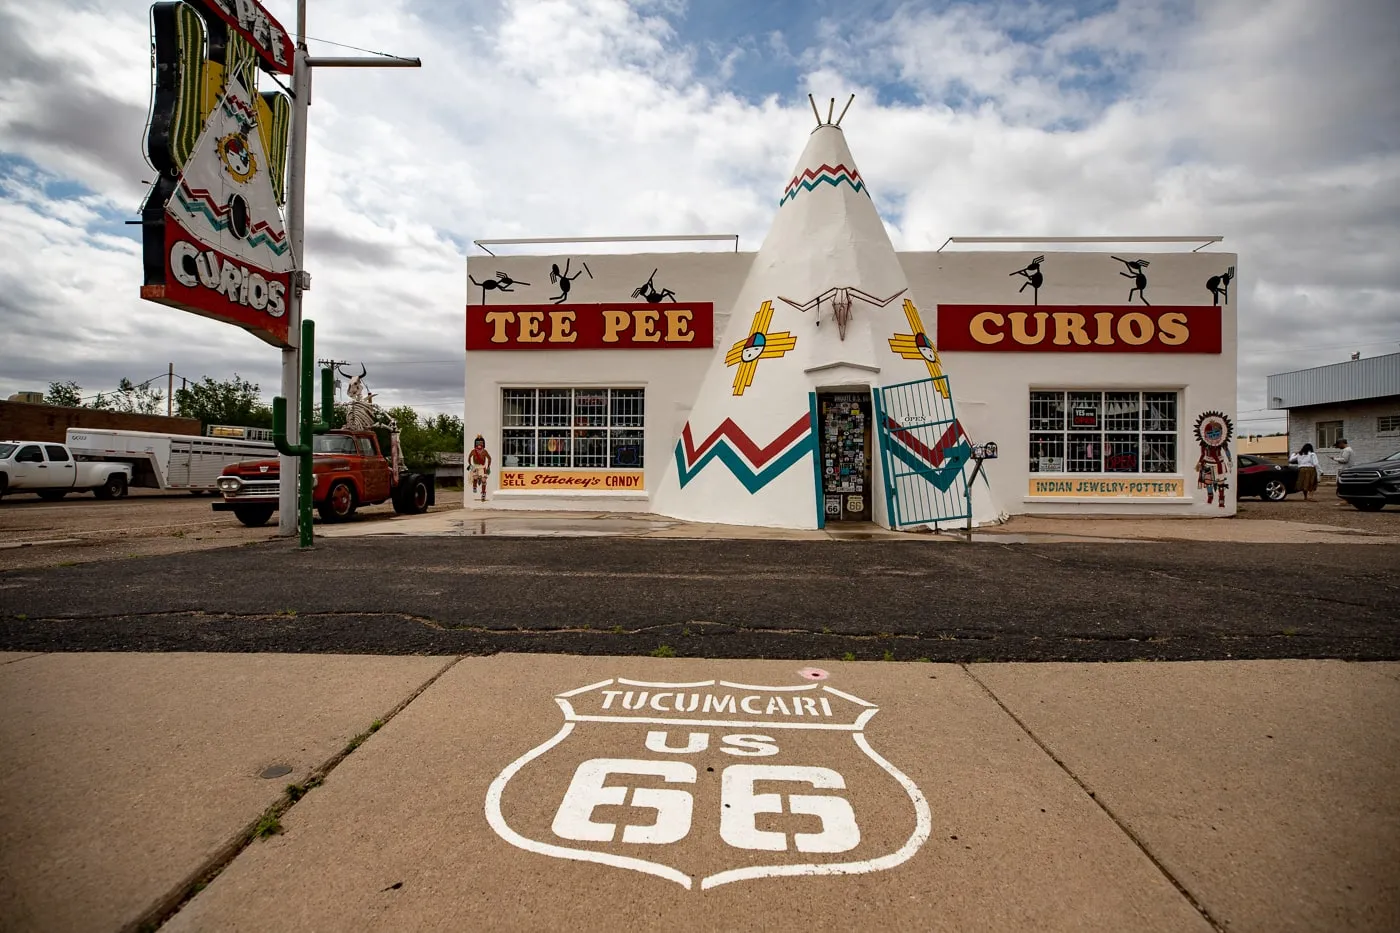 Route 66 shield on the sidewalk at Tee Pee Curios in Tucumcari, New Mexico - Route 66 Roadside Attraction